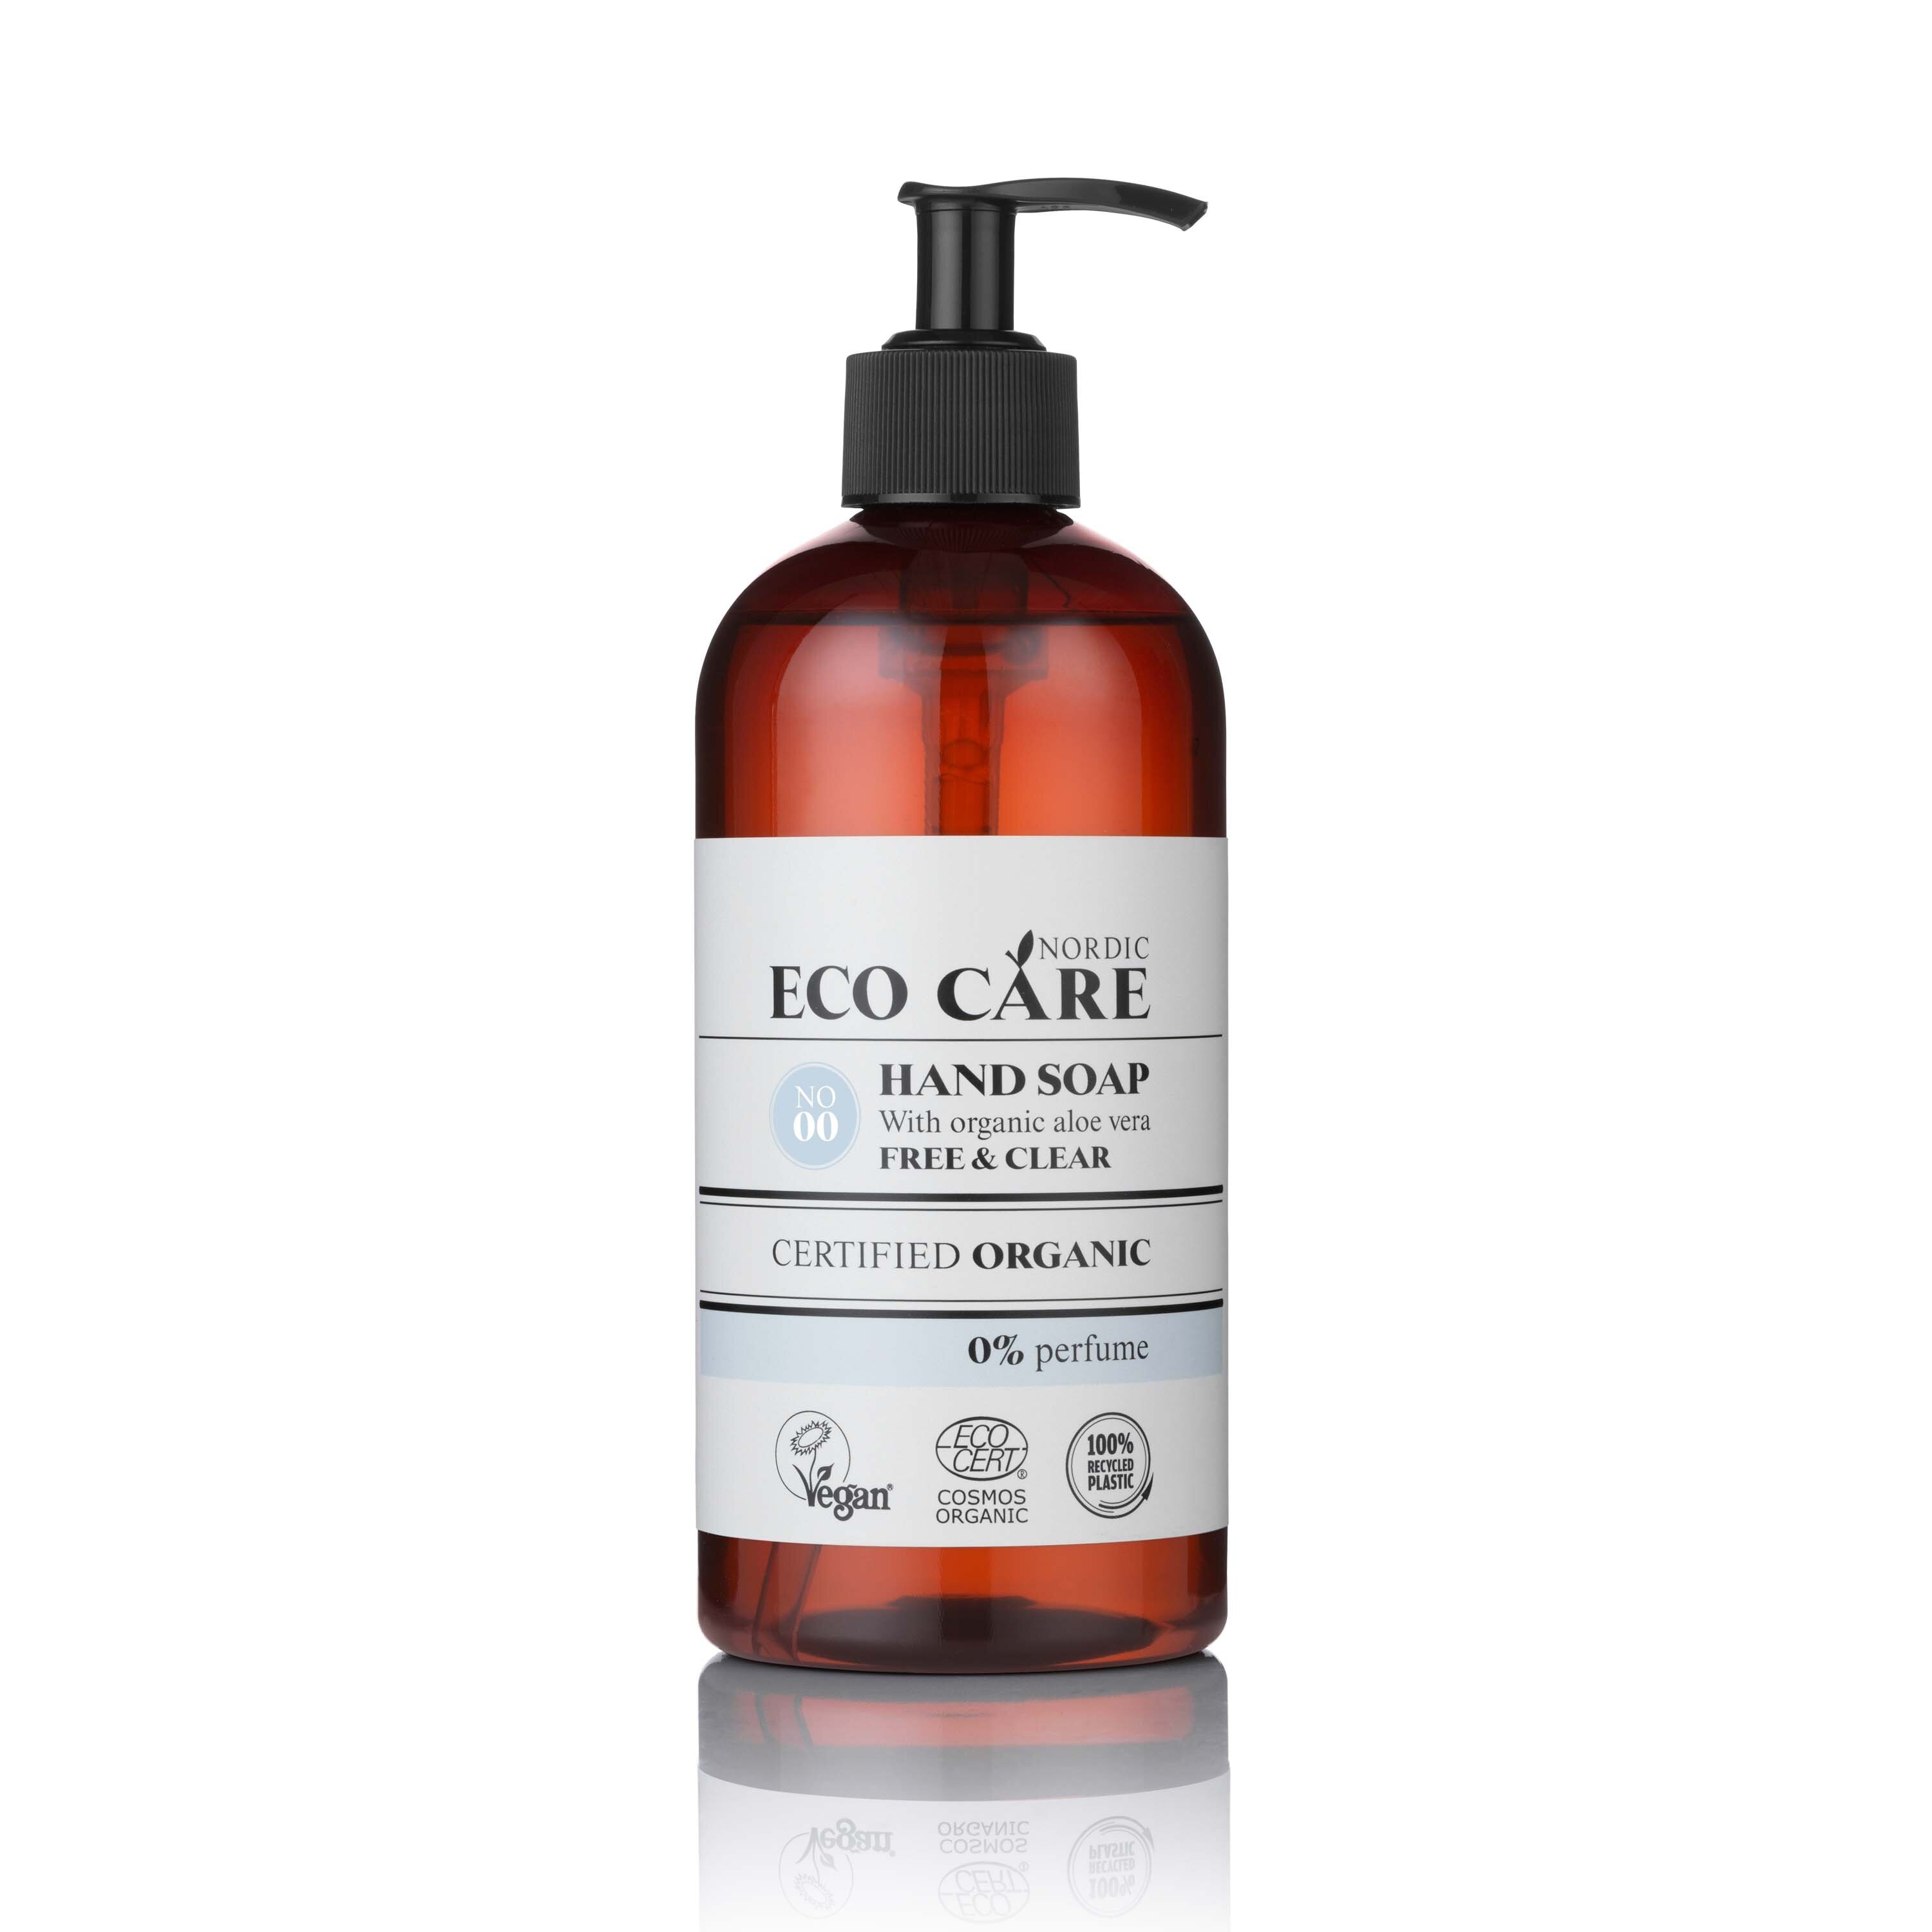 EcoCare Handsoap Free & Clear 500ml